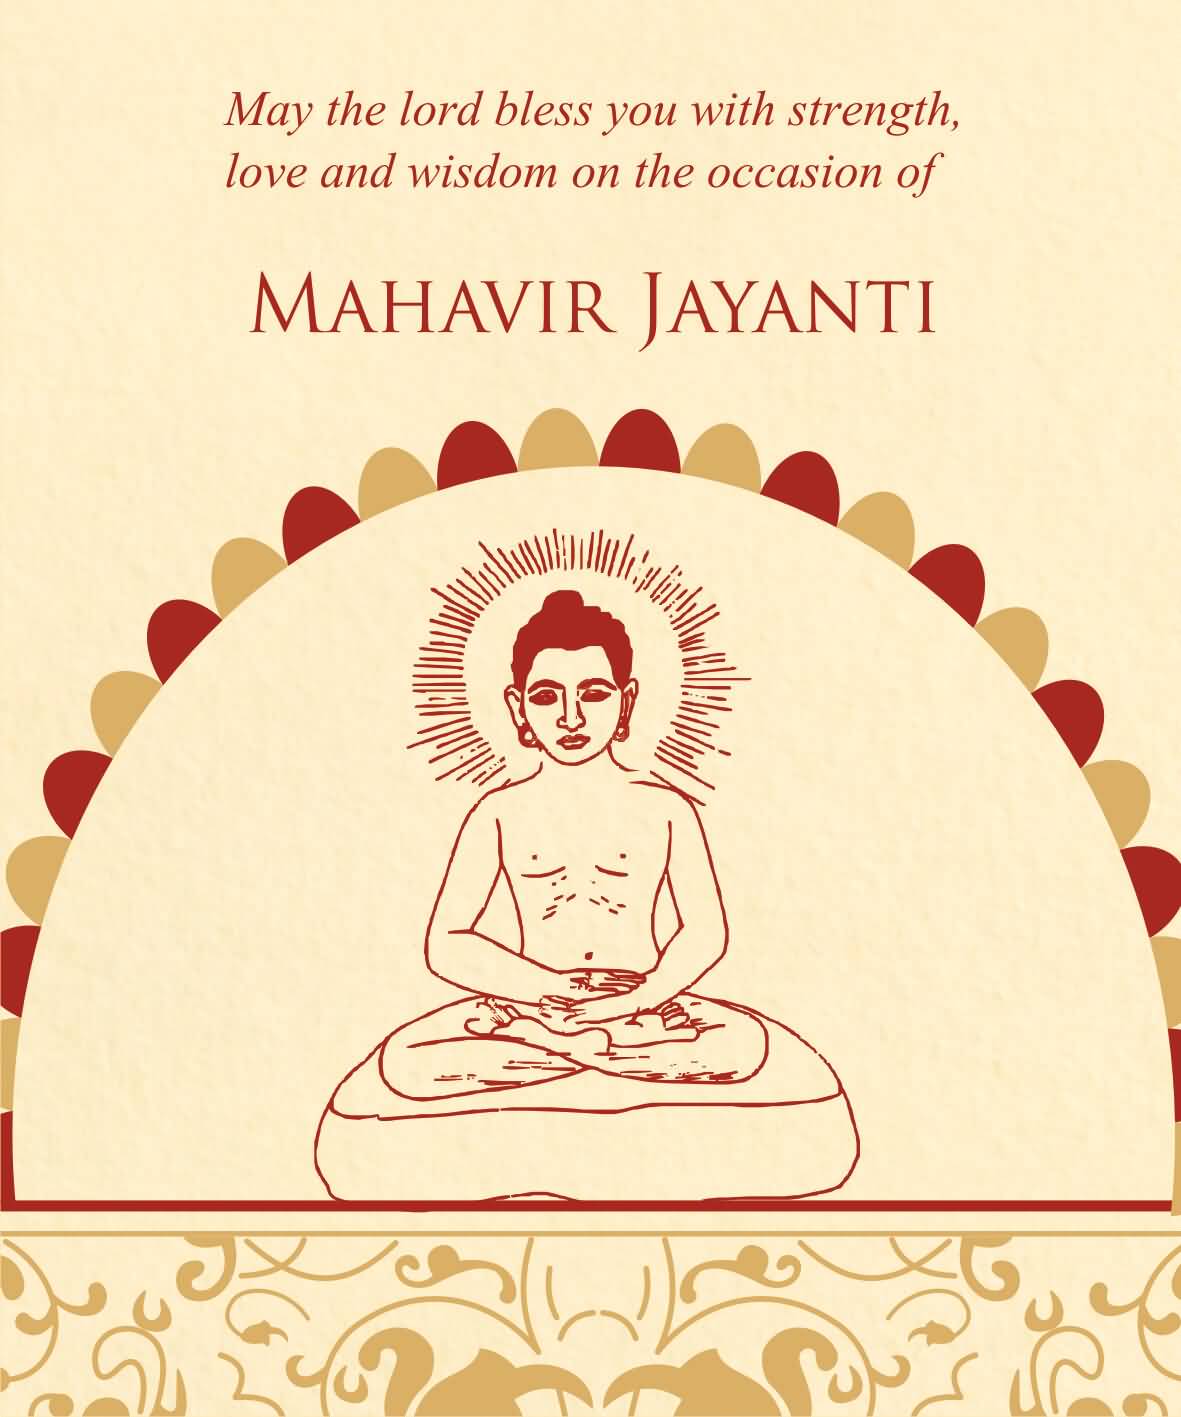 May The Lord Bless You With Strength, Love And Wisdom On The Occasion Of Mahavir Jayanti